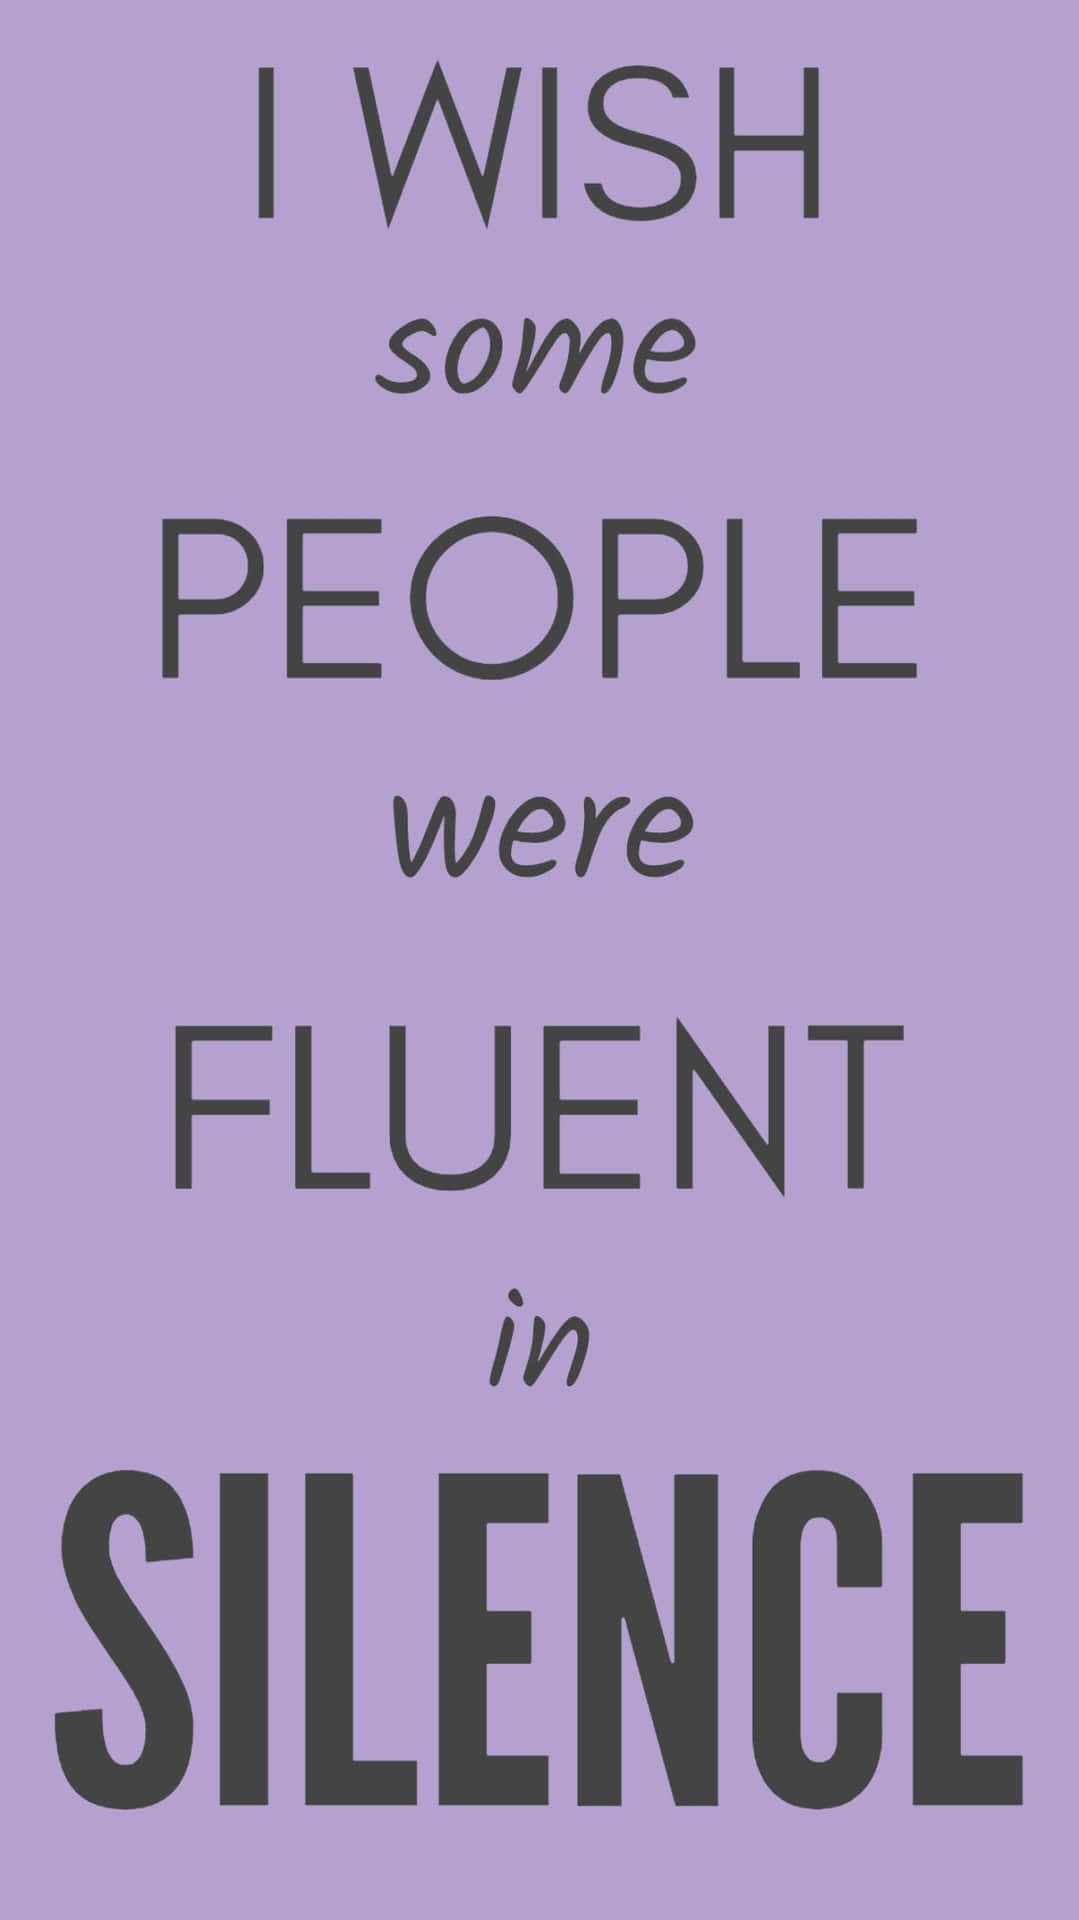 I Wish Some People Were Fluent In Silence Wallpaper